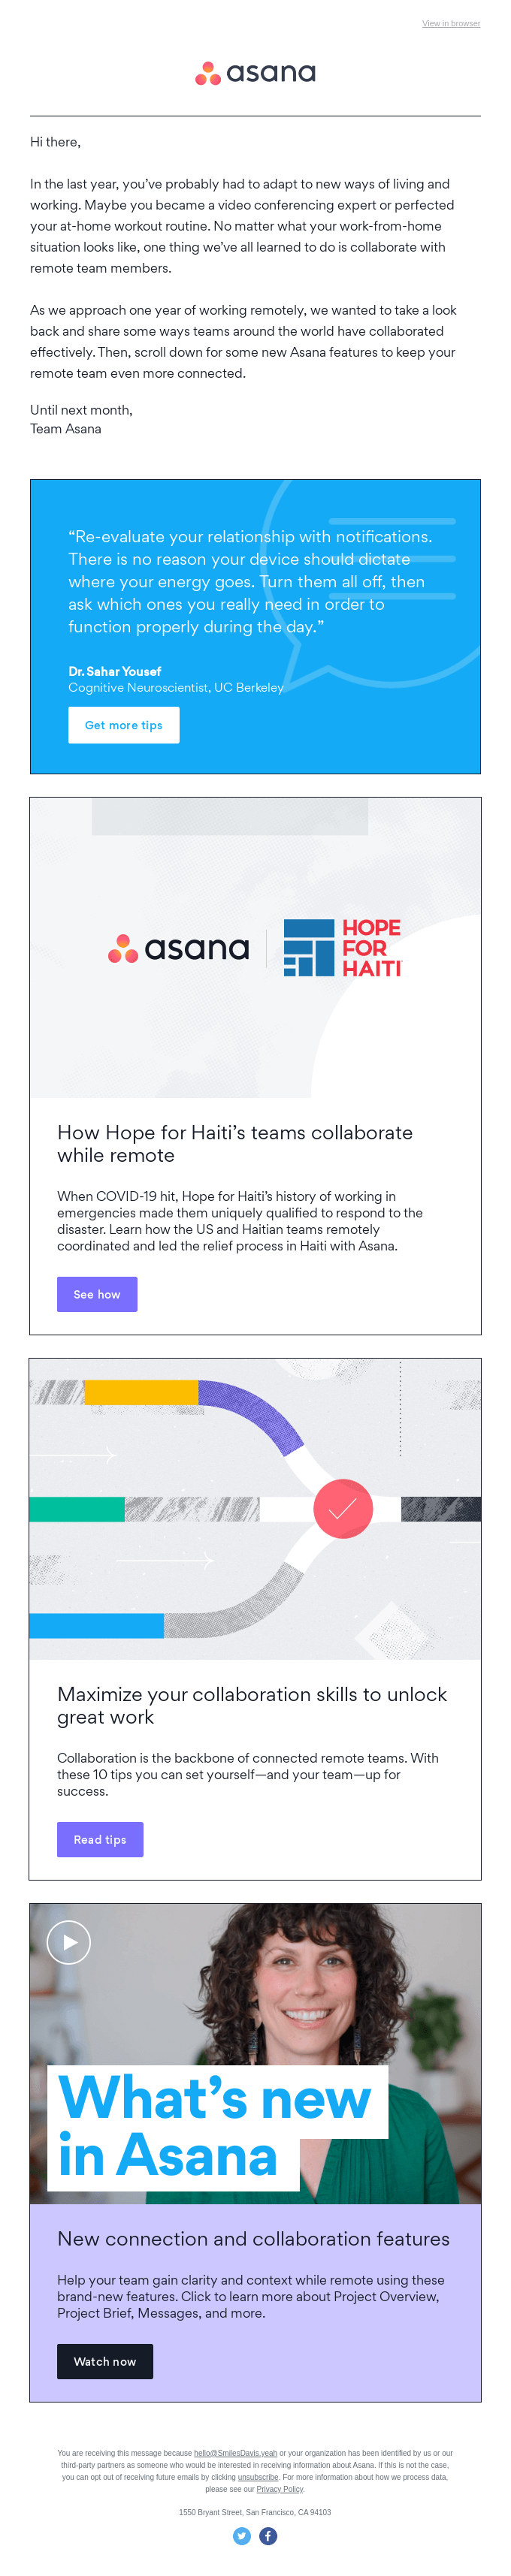 Stop, collaborate, and listen - Asana Email Newsletter